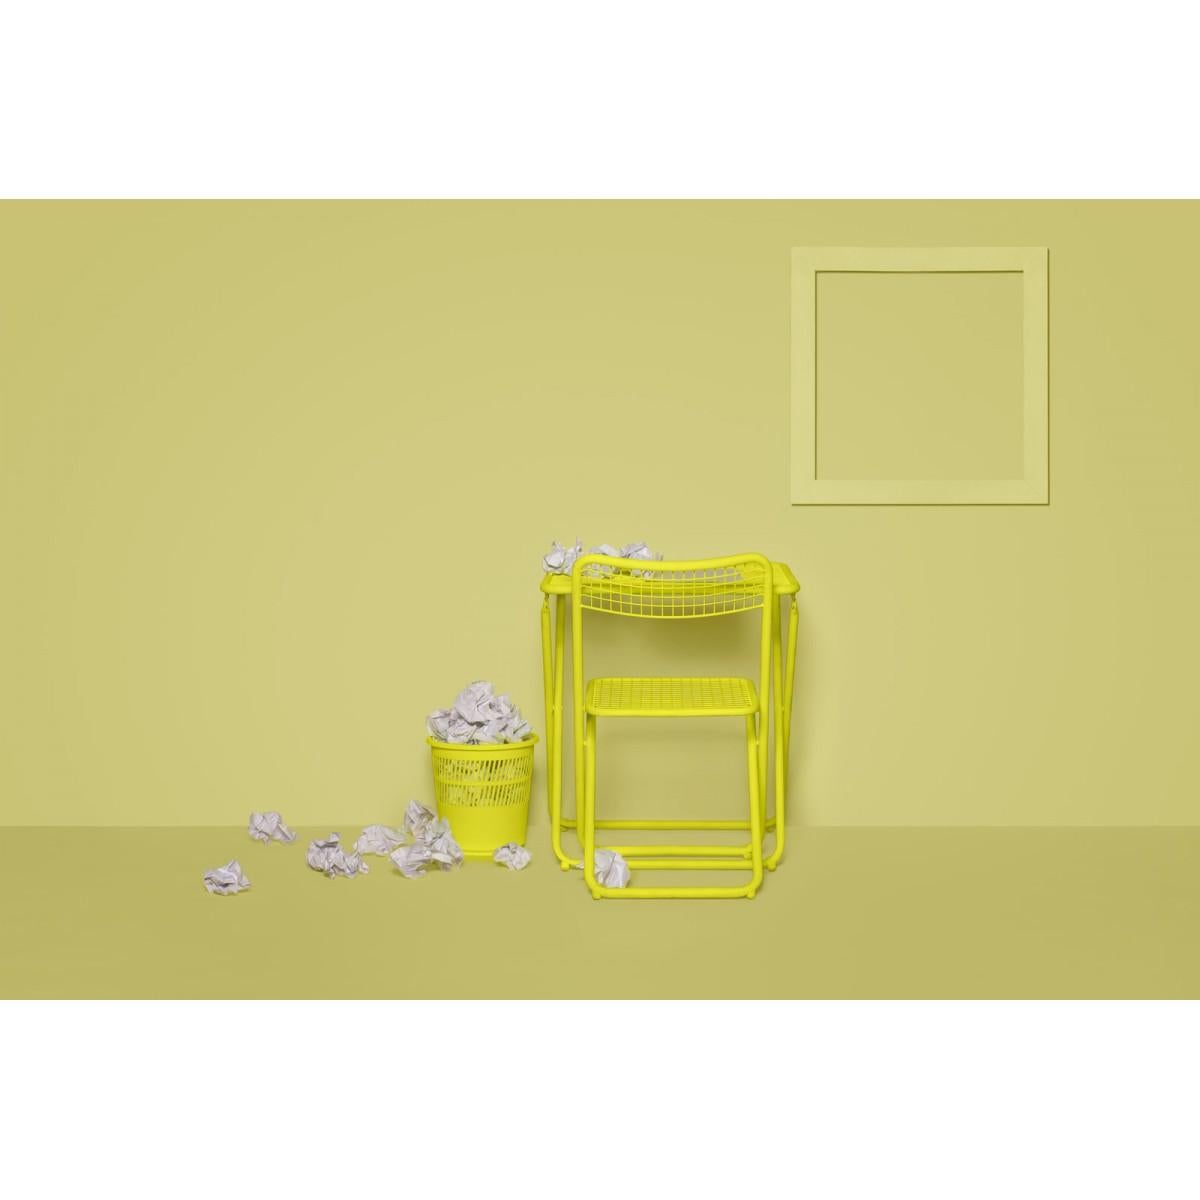 New Folding Iron Chair Yellow 1026 by Houtique & Masquespacio Signed 1